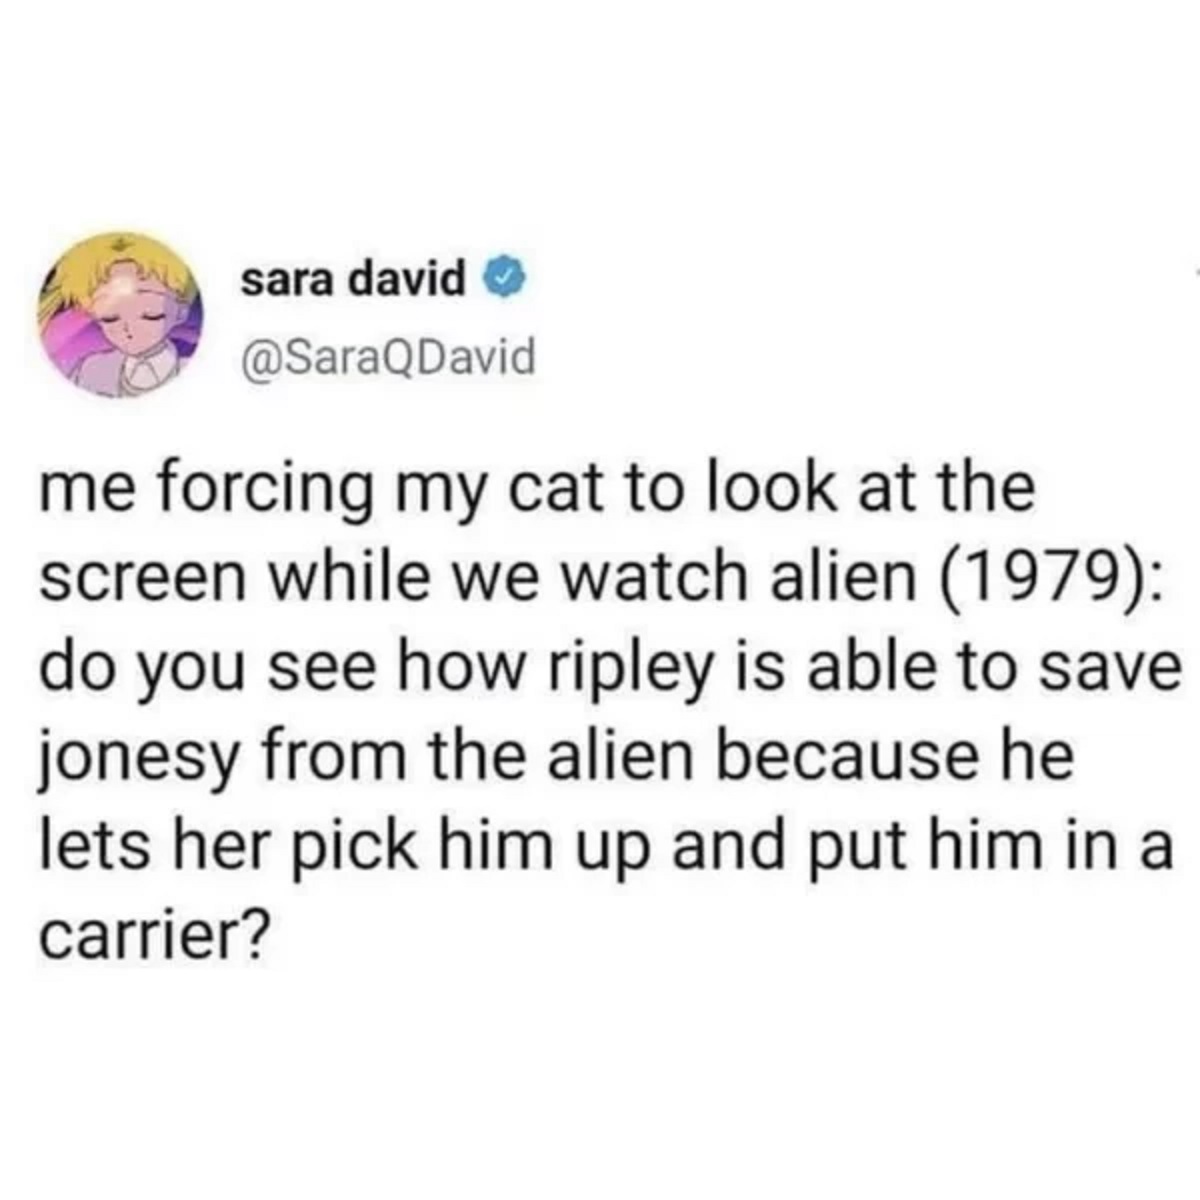 point - sara david me forcing my cat to look at the screen while we watch alien 1979 do you see how ripley is able to save jonesy from the alien because he lets her pick him up and put him in a carrier?